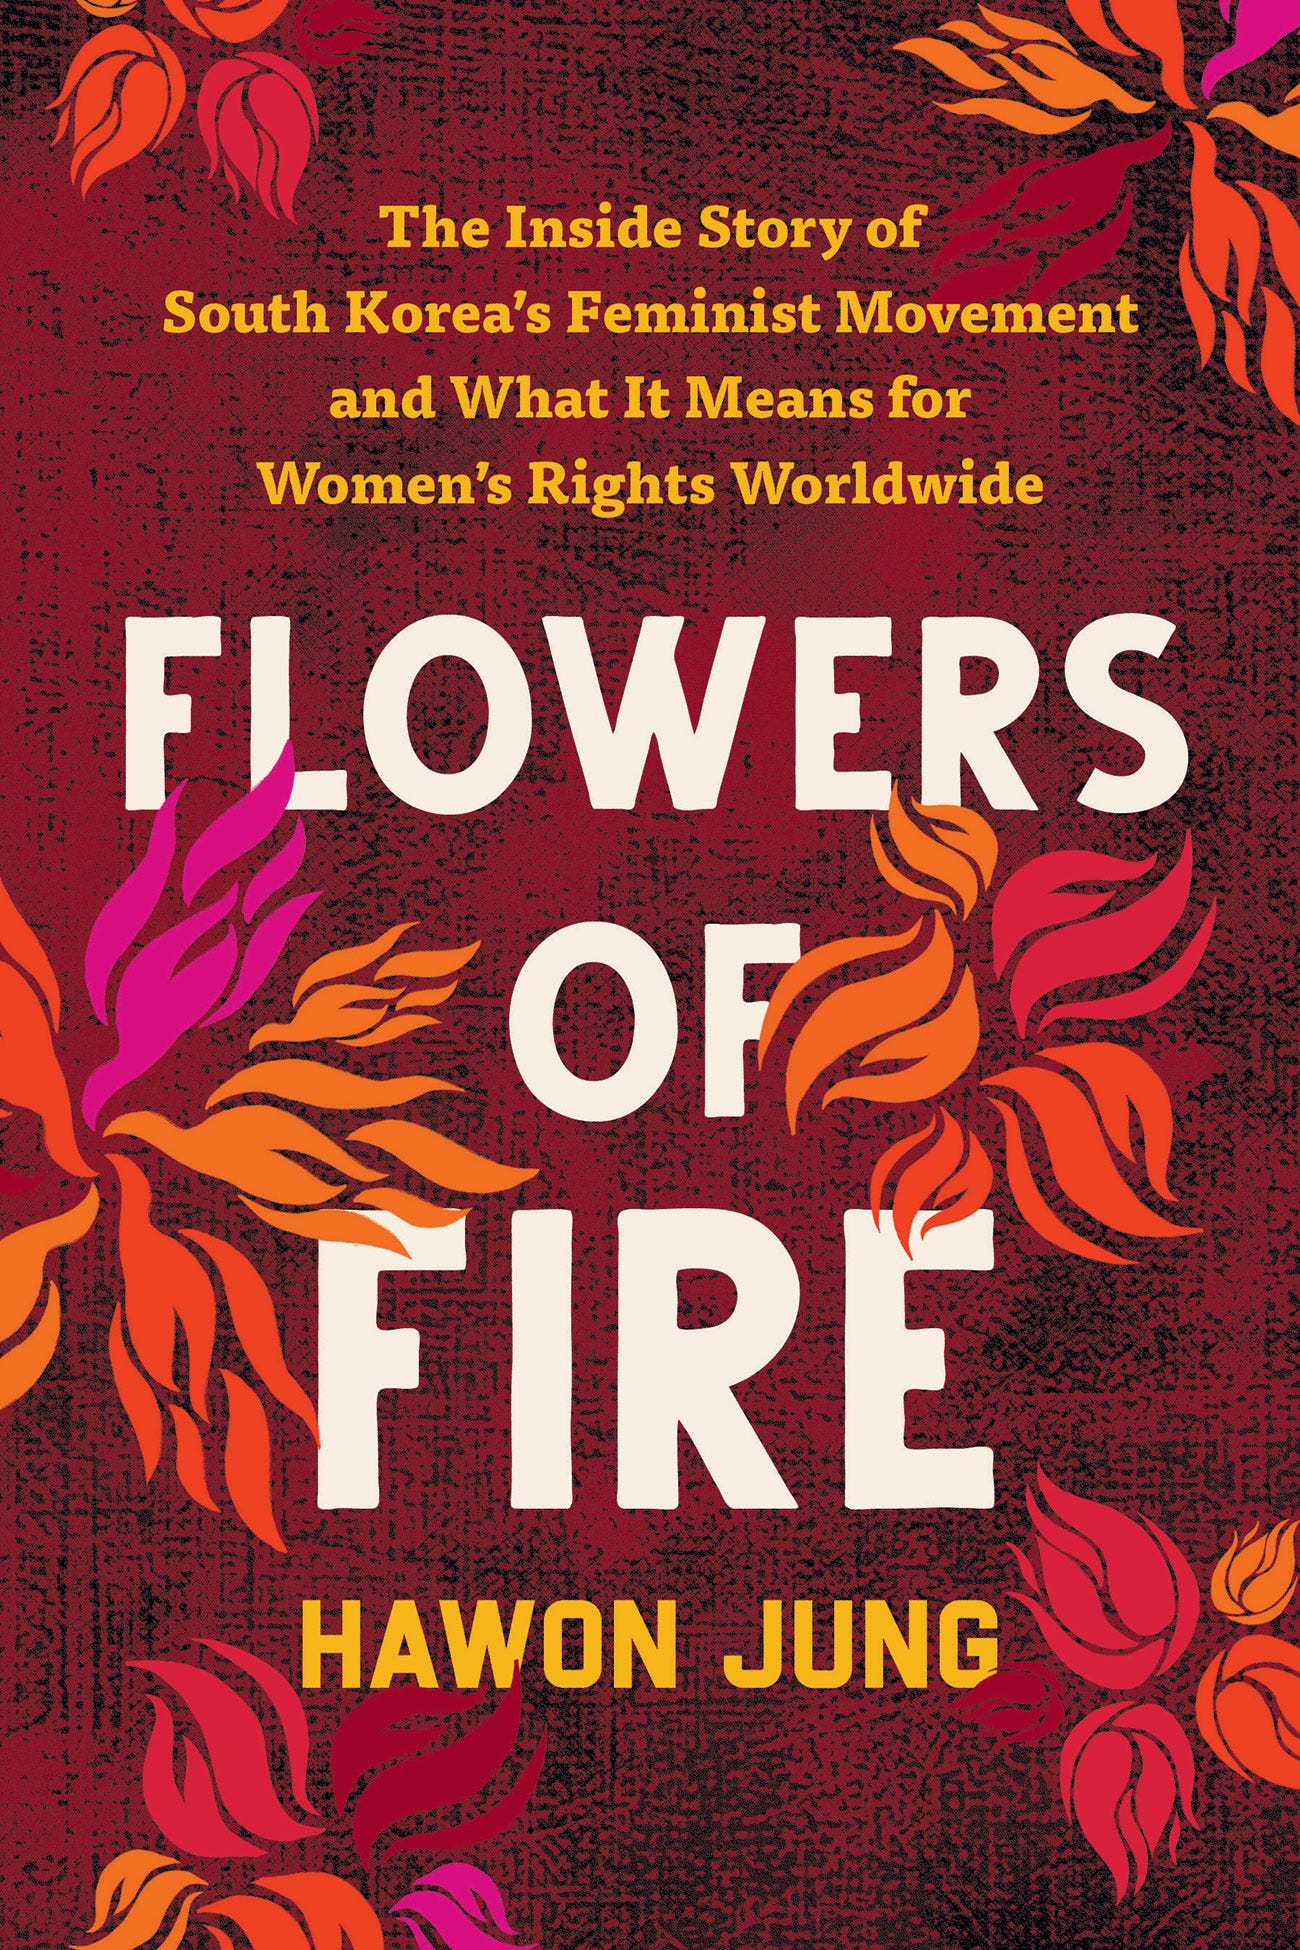 Flowers of Fire: The Inside Story of South Korea's Feminist Movement and  What It Means for Women's Rights Worldwide by Hawon Jung | Goodreads